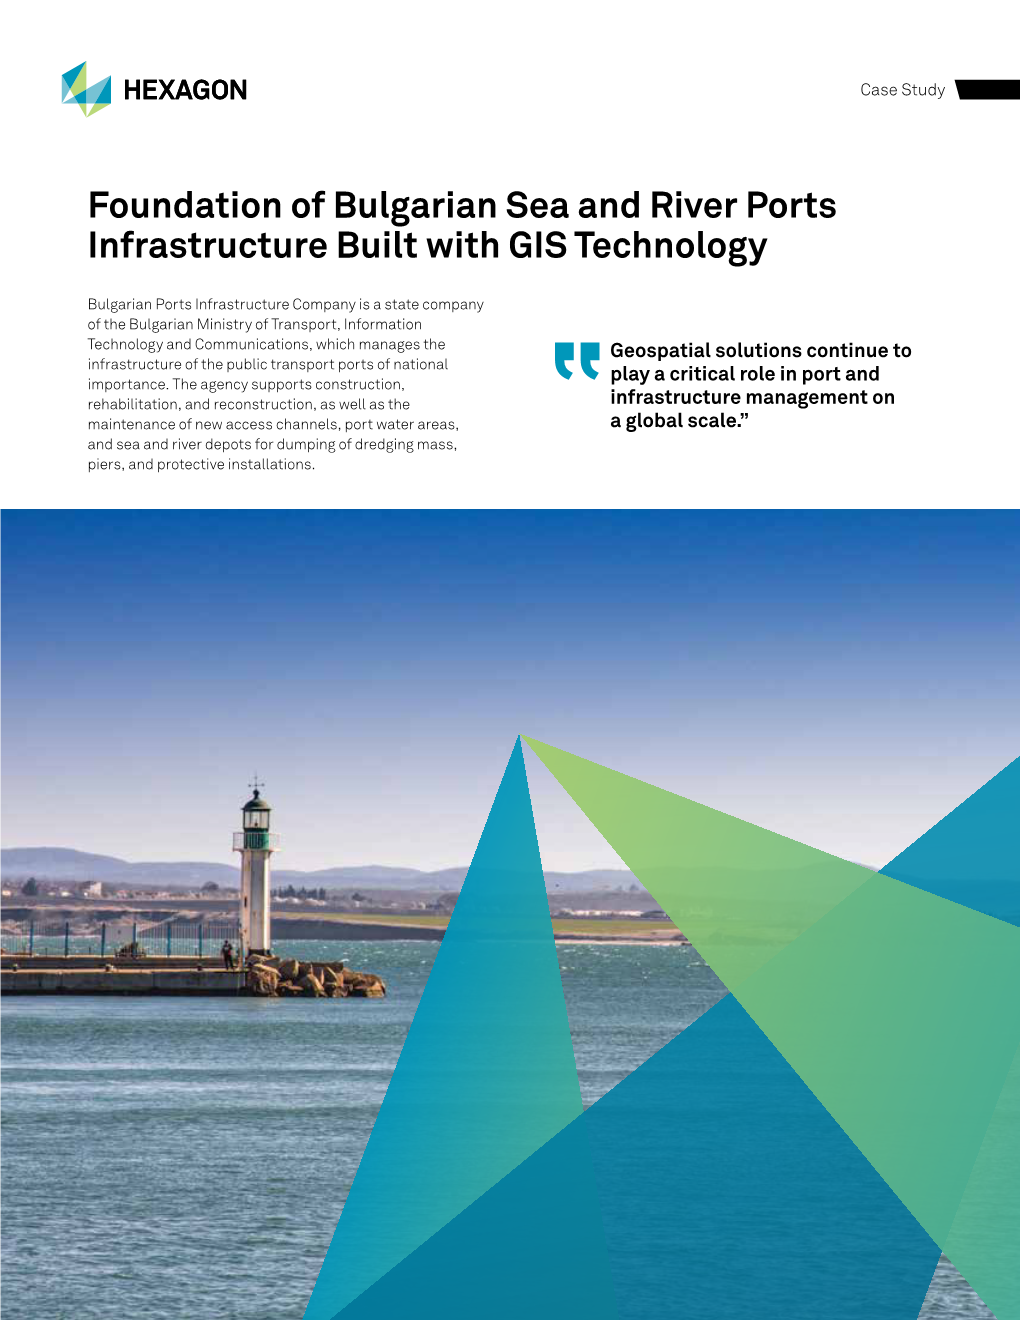 Foundation of Bulgarian Sea and River Ports Infrastructure Built with GIS Technology